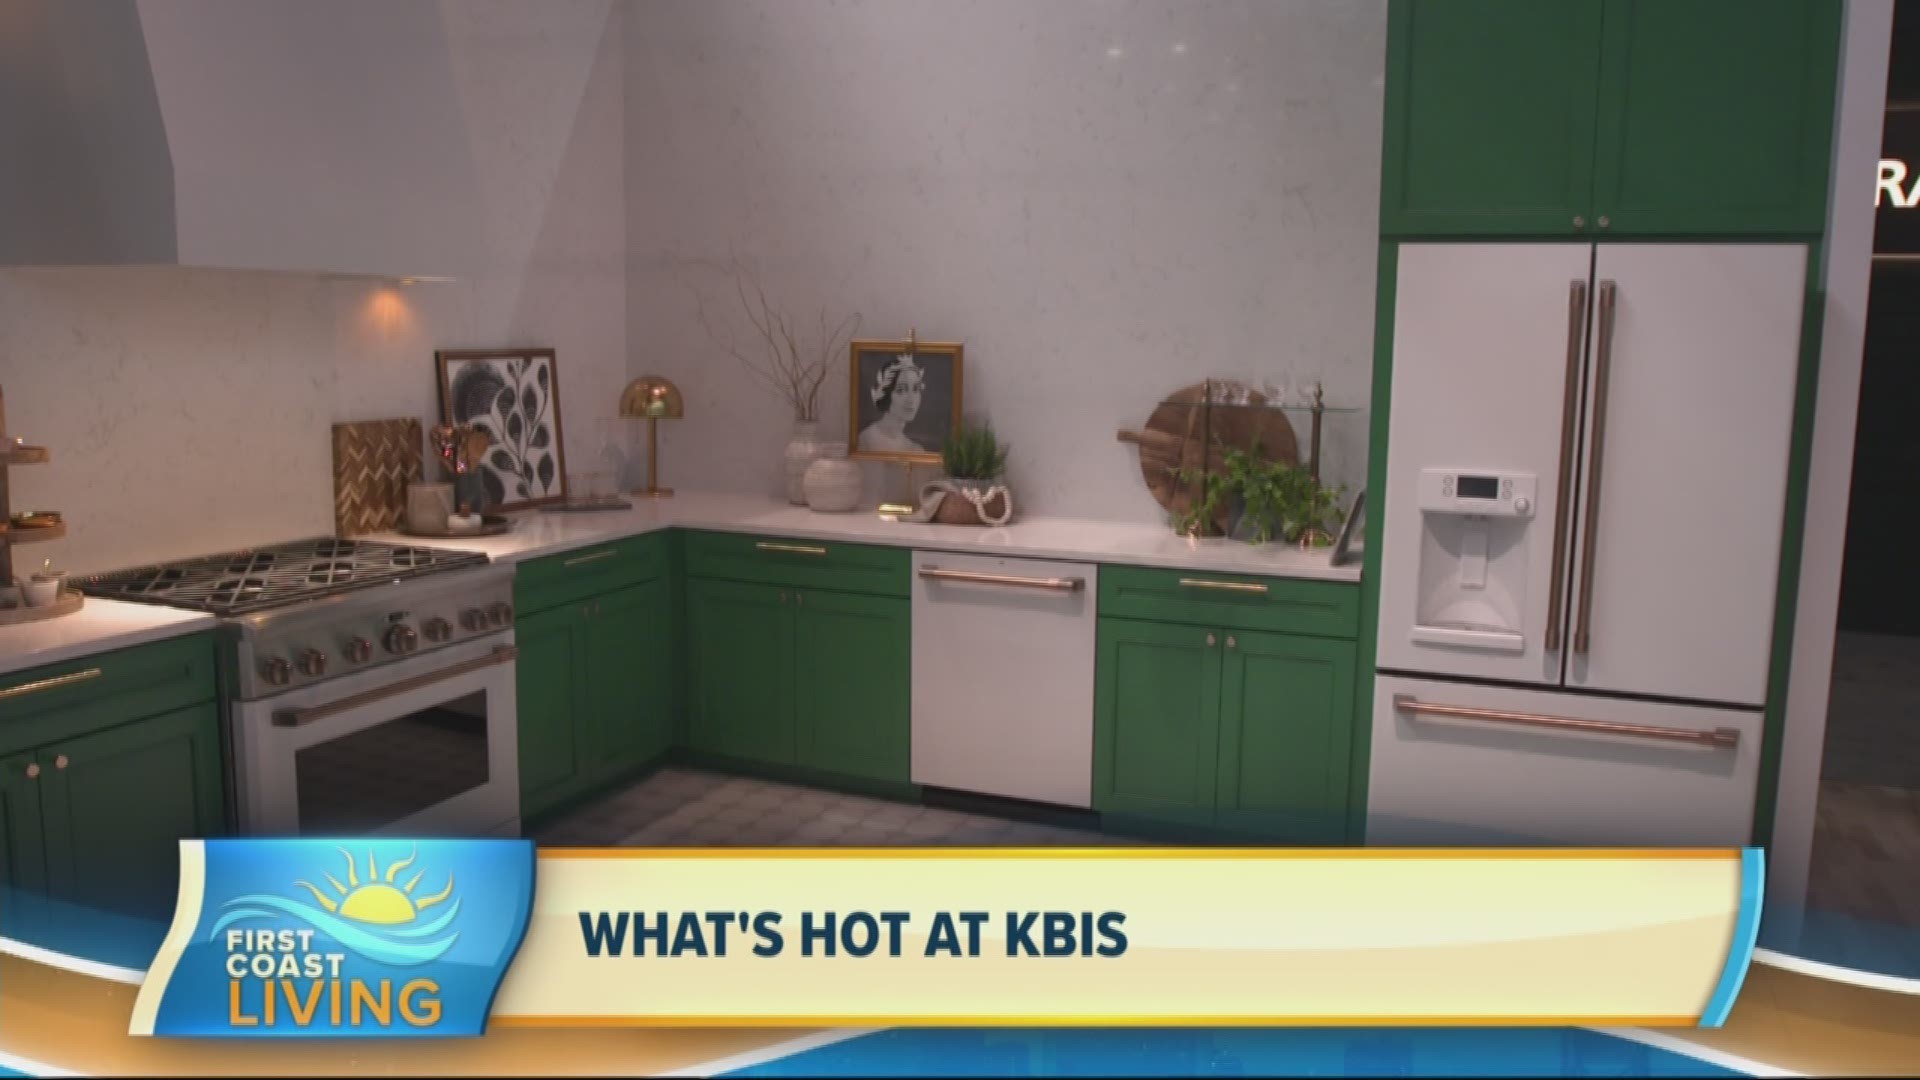 Lifestyle Expert Kelly Edwards brings us the hottest products at the Kitchen and Bath show.